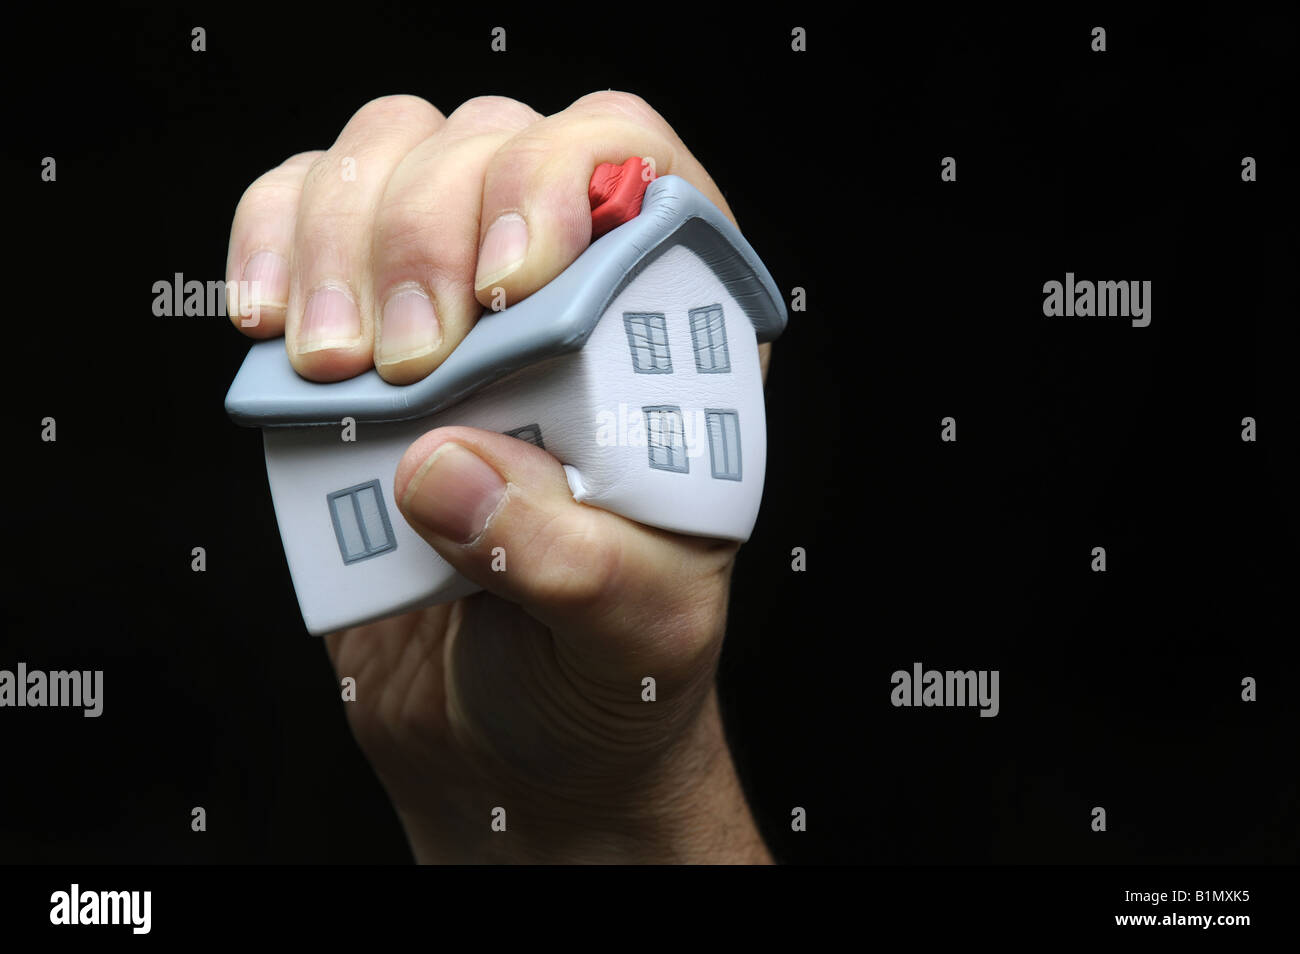 MODEL HOUSE HELD IN A MANS HAND RE PROPERTY MARKETS RISING PRICES MORTGAGES ECONOMY ETC,UK. Stock Photo